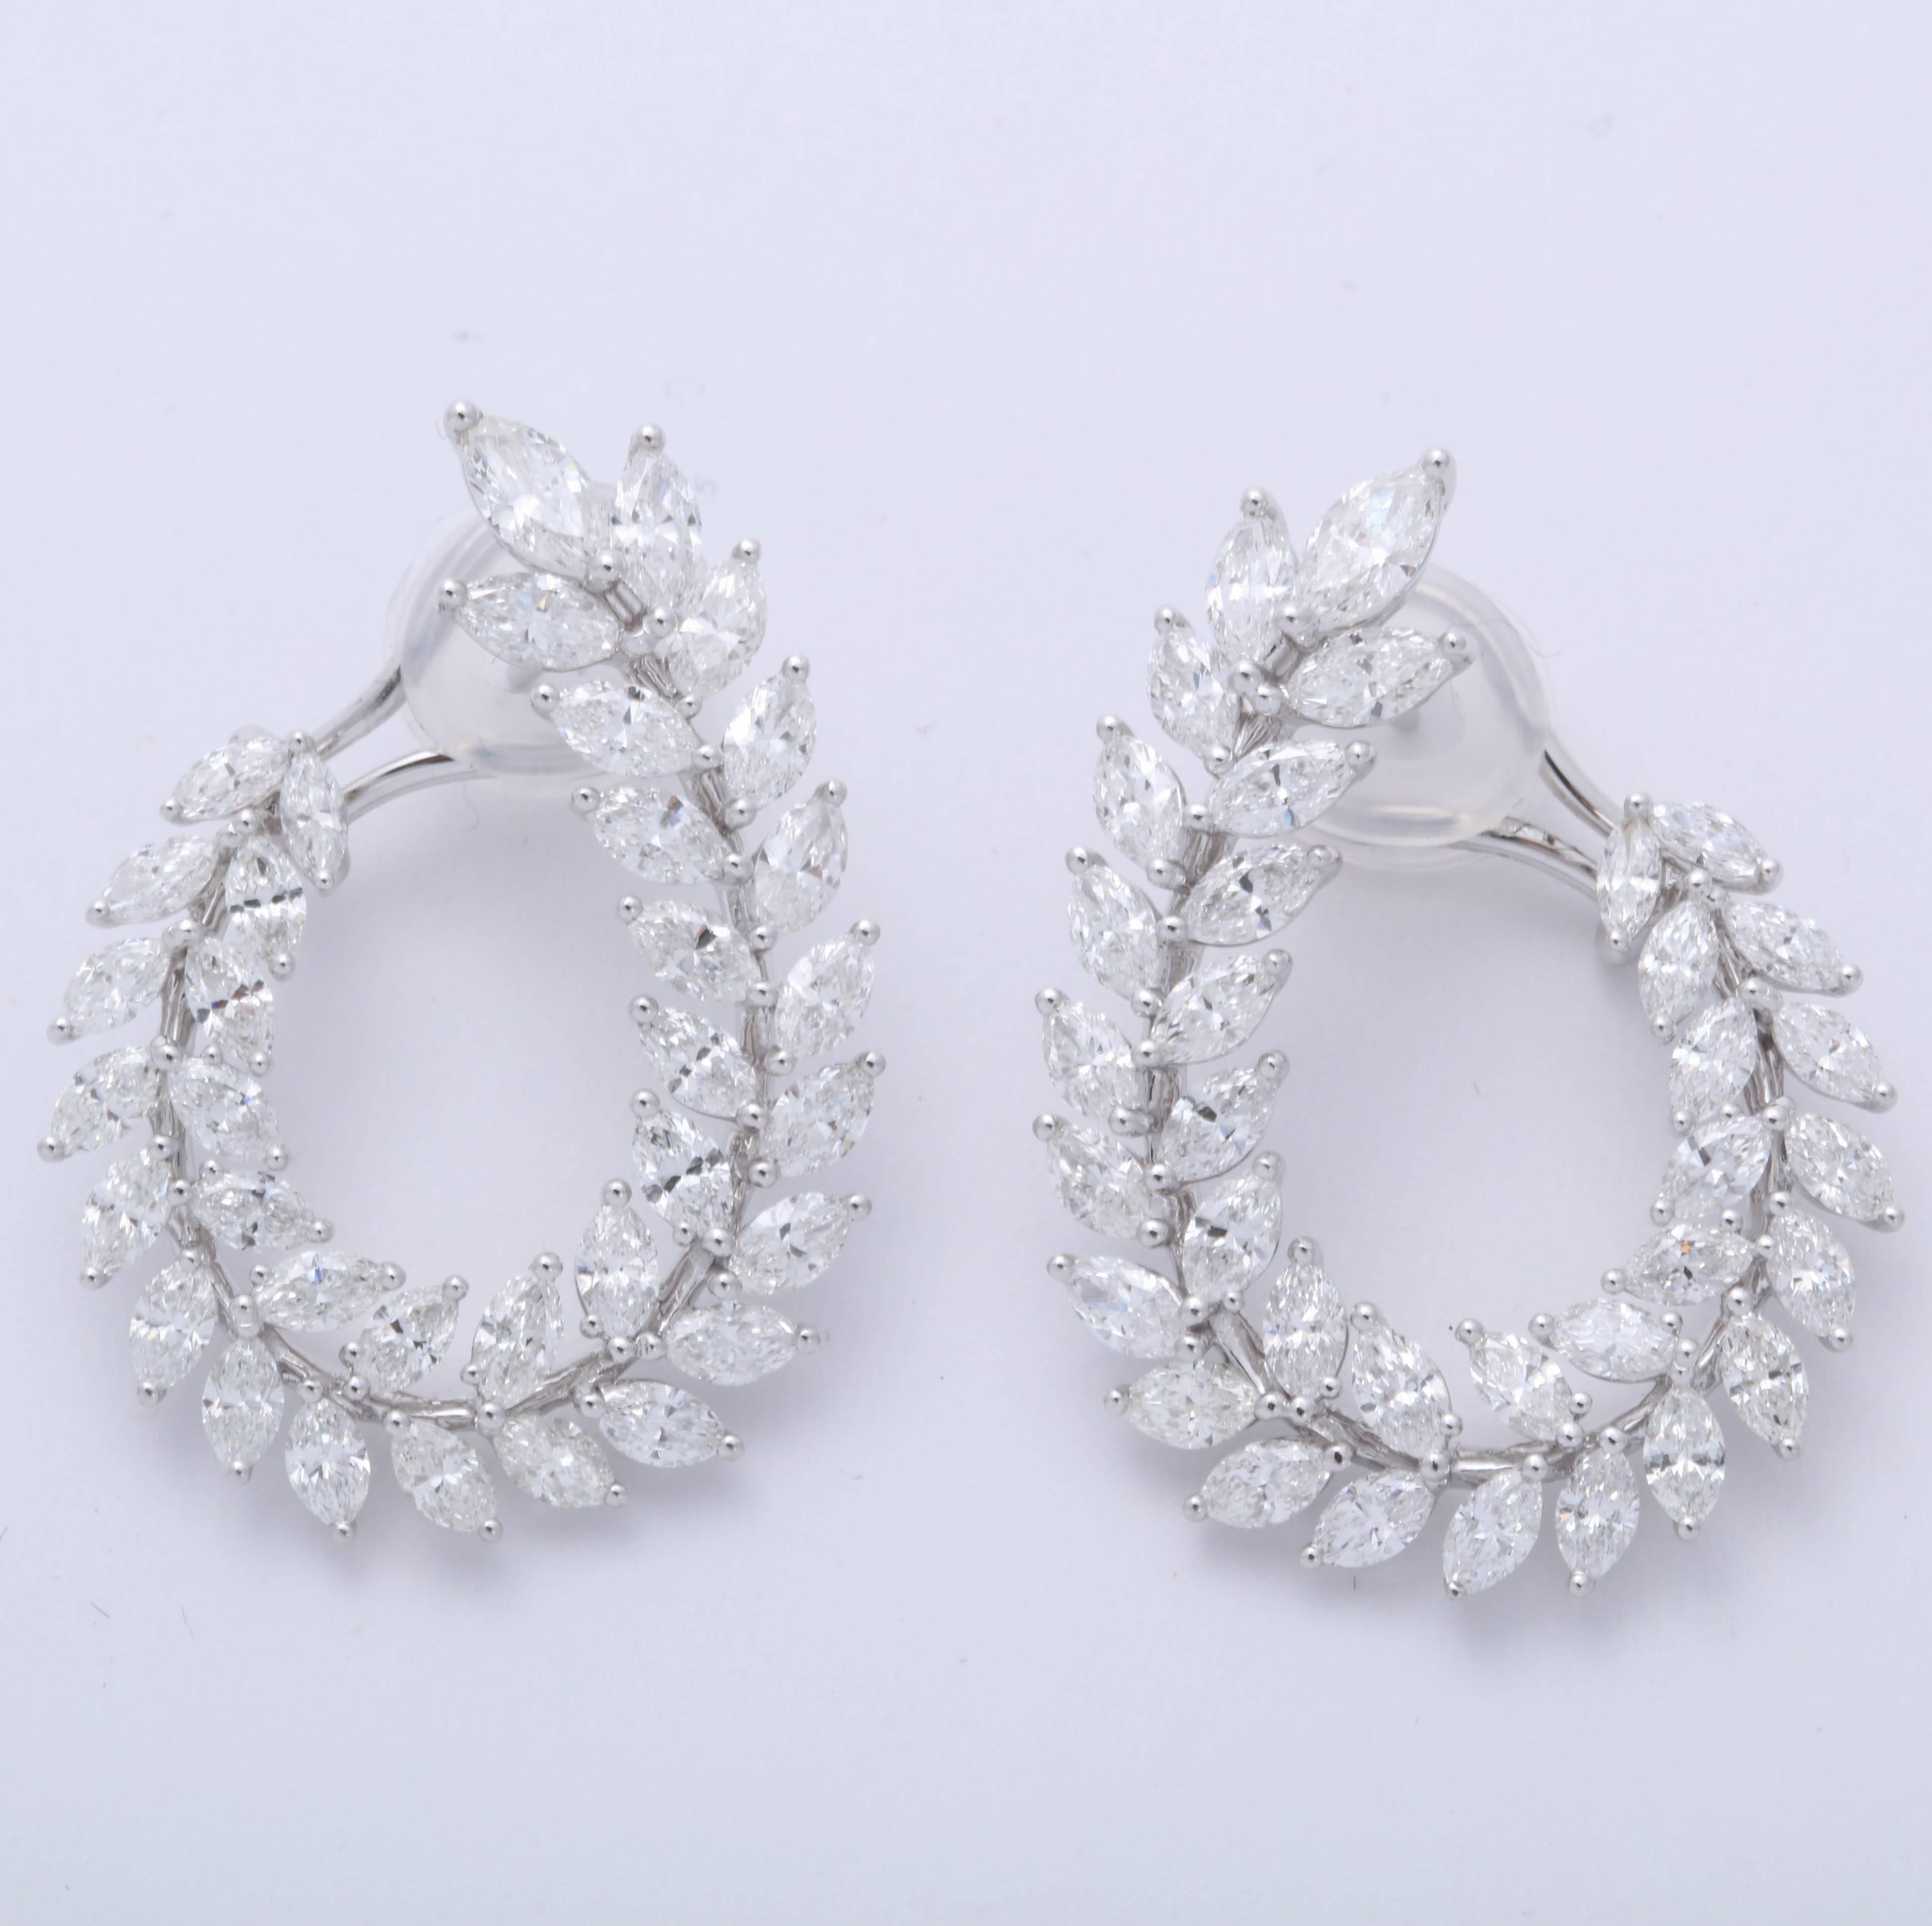 
A gorgeous pair of diamond earrings.

6.97 carats of marquise cut diamonds 

18k white gold

Approximately 1.25 inches long, just under an inch at its widest point. 

A must have -- pictures do not do these earrings justice. 

An impeccable design,